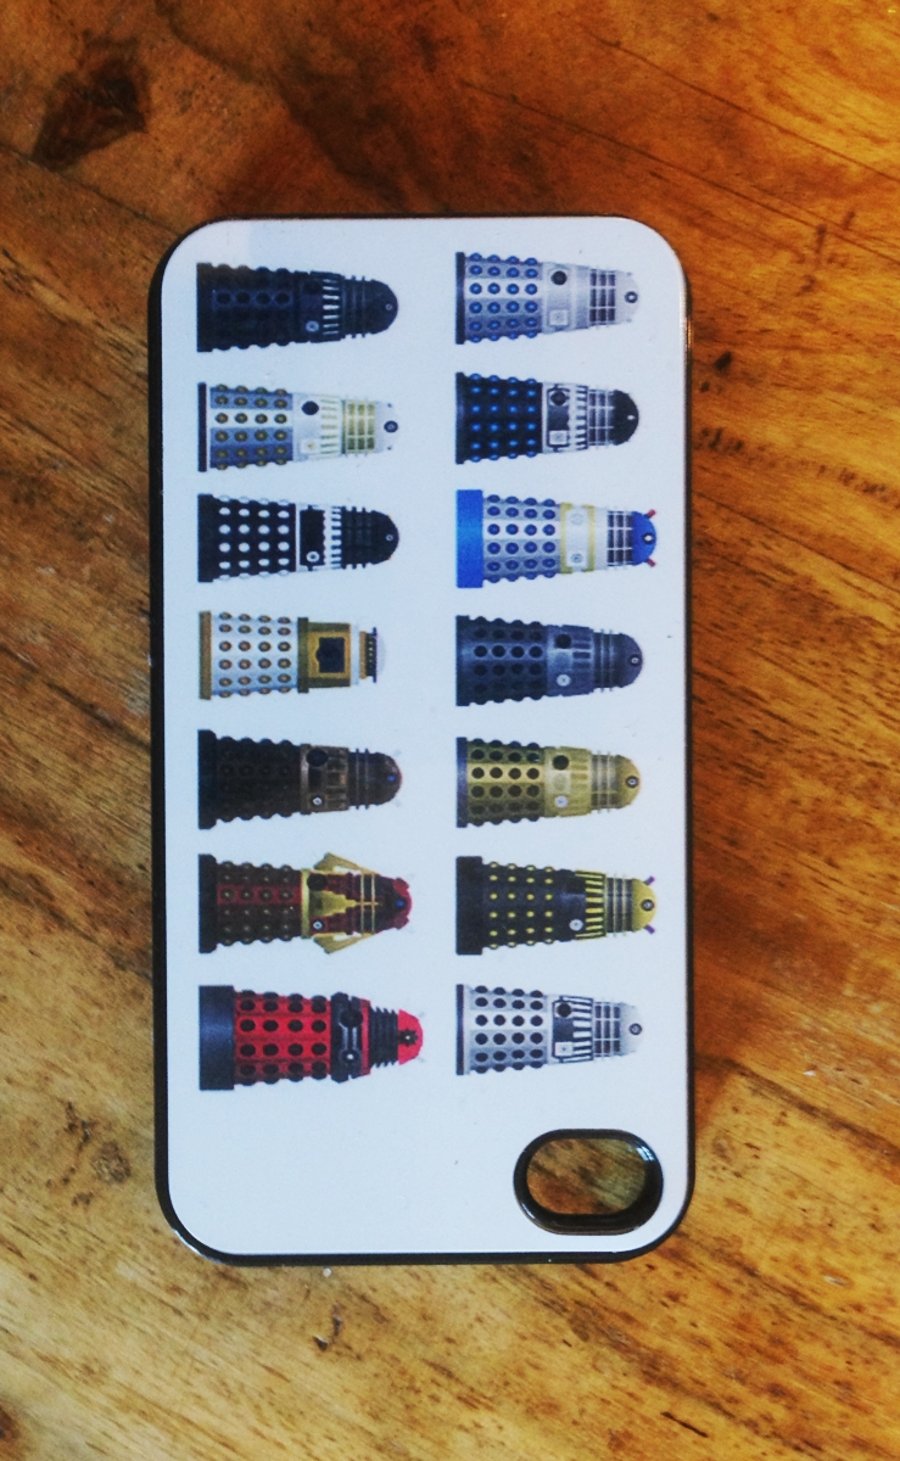 Daleks in Dr Who Phone case for various phones